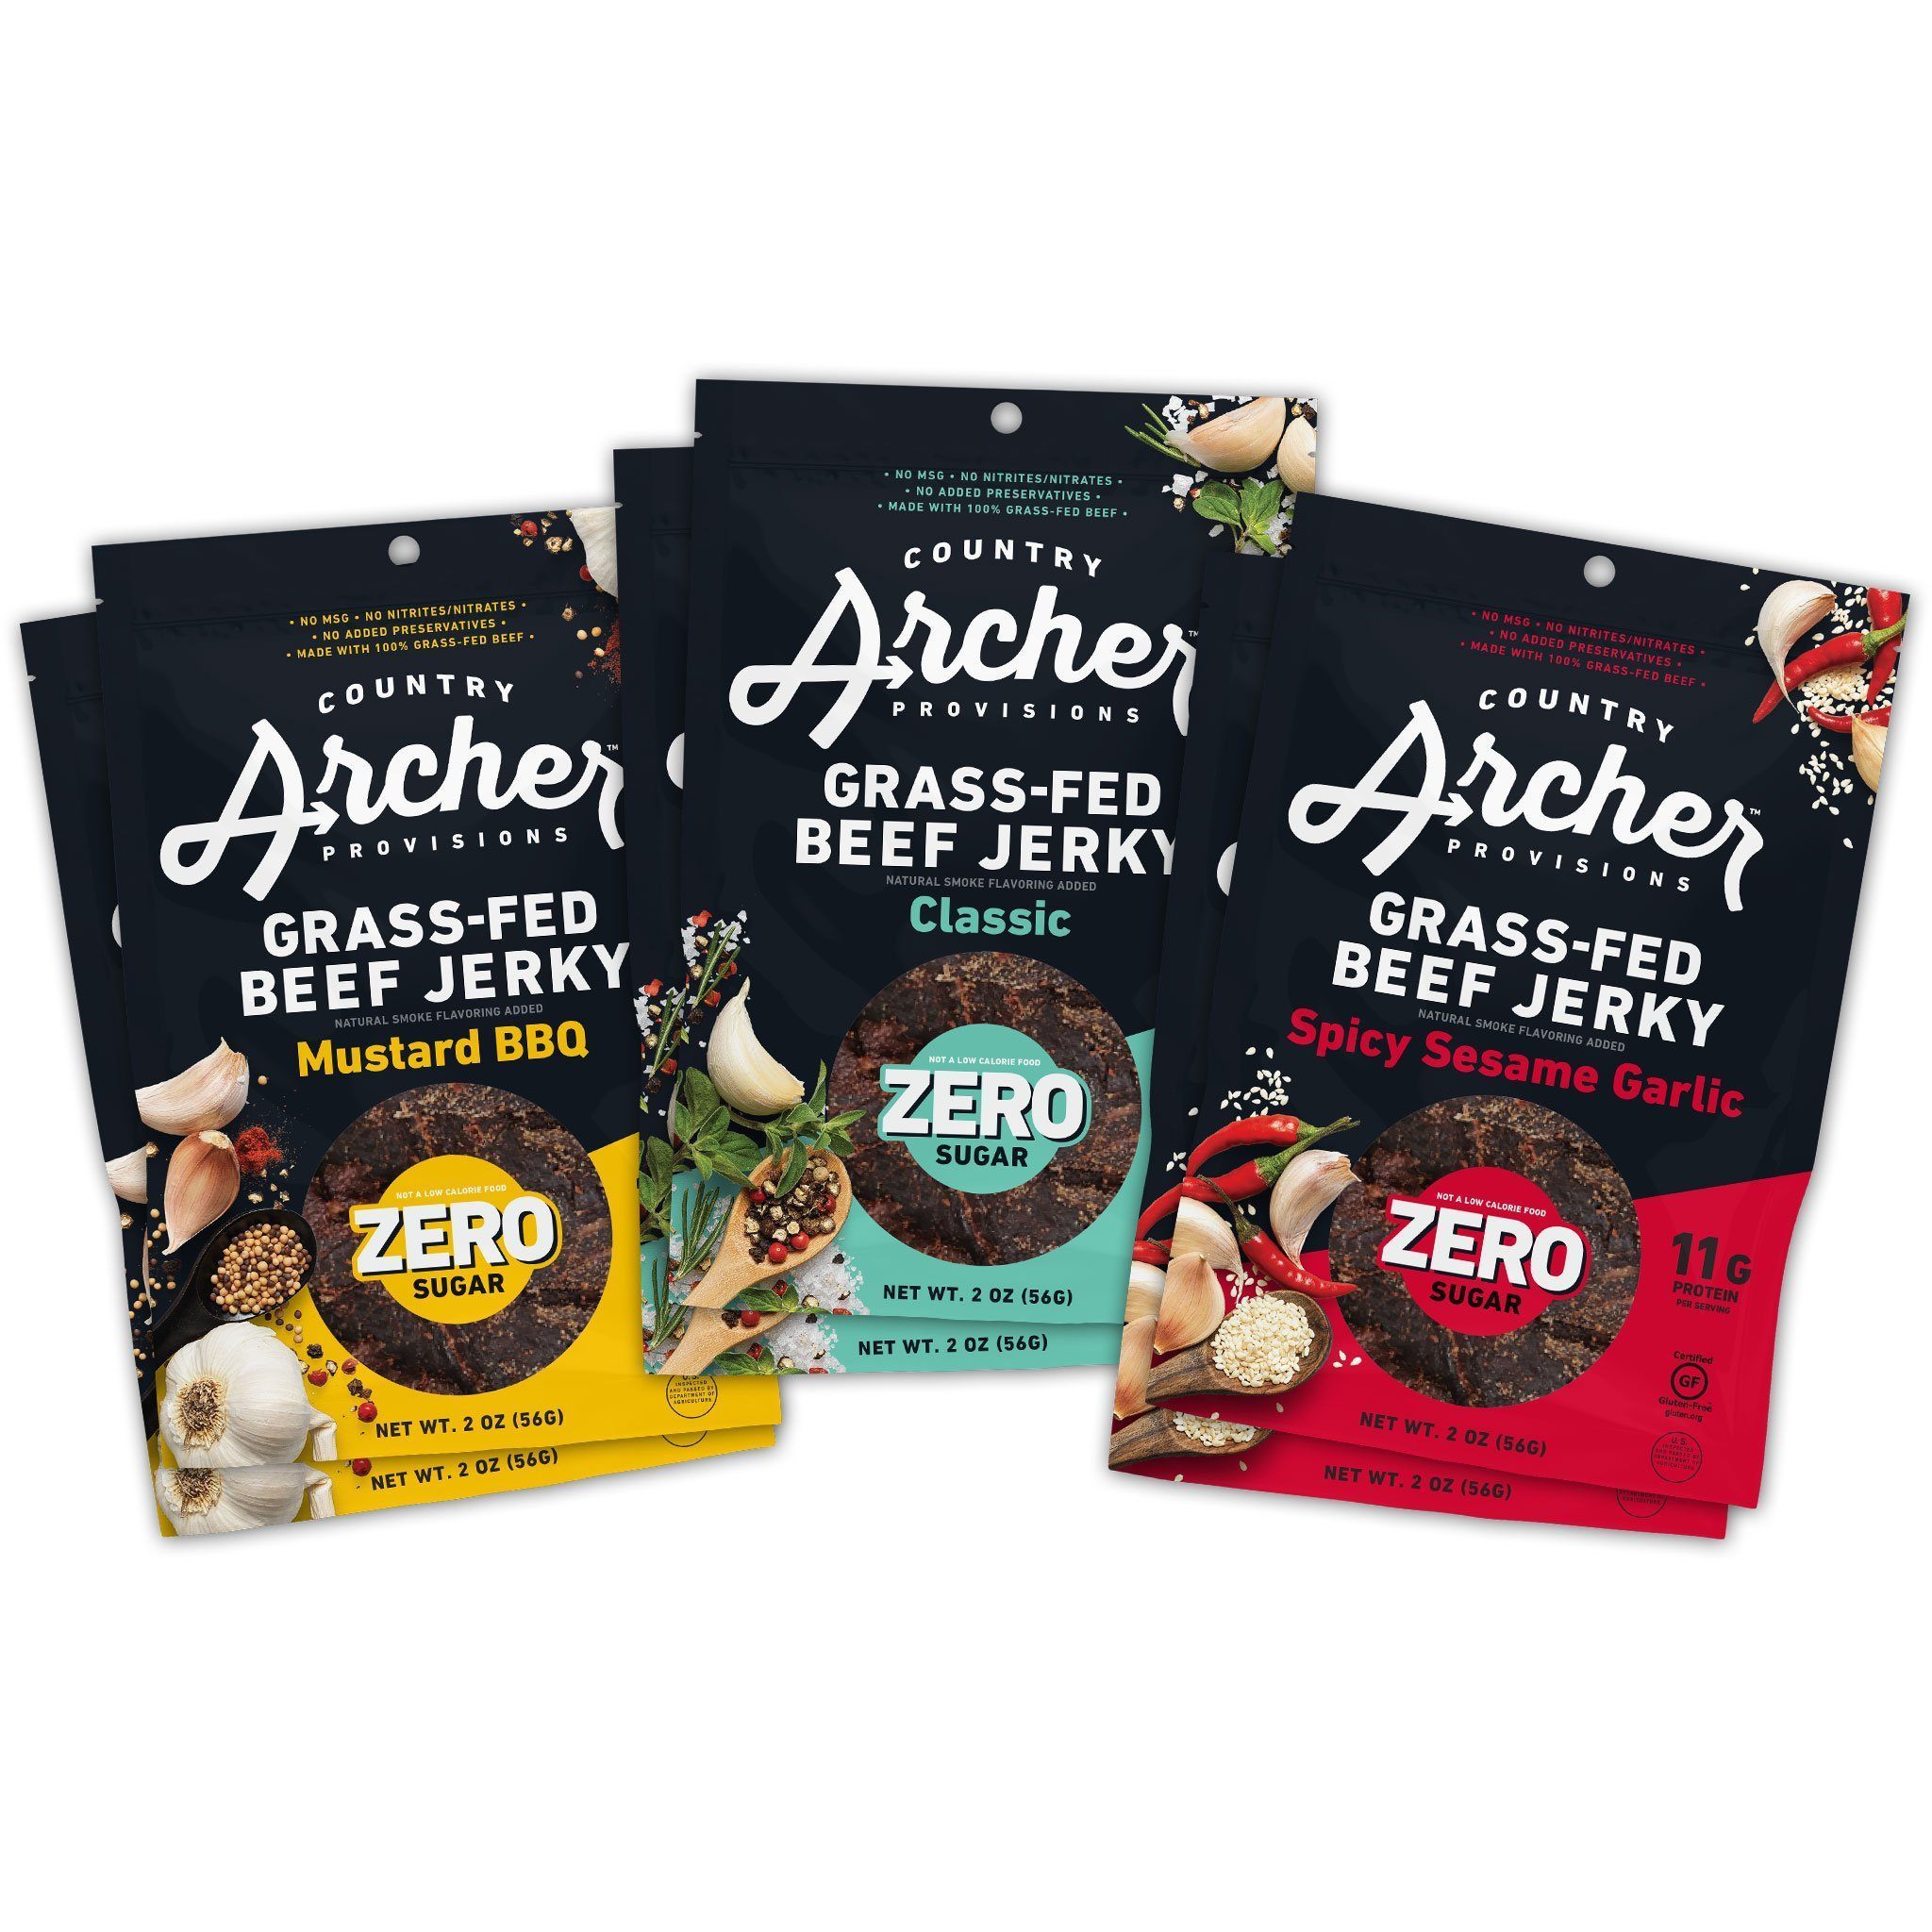 Country Archer Provisions Launches New Zero Sugar Beef Jerky